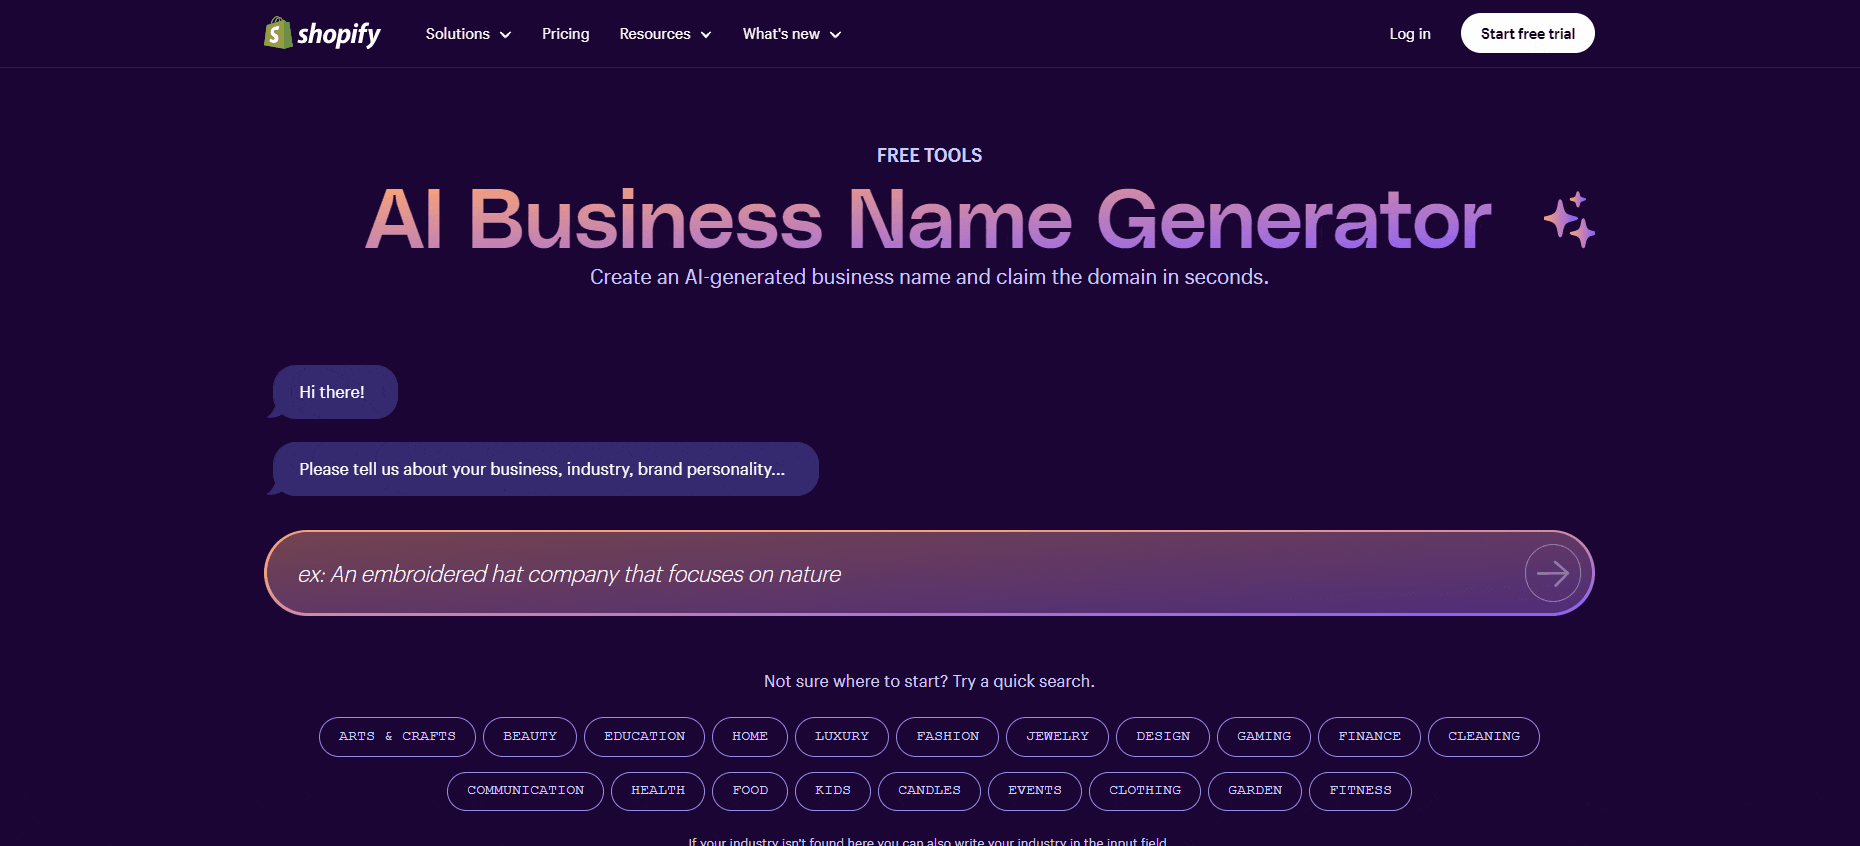 Free AI business name generator. A screen recording of how the platform works.